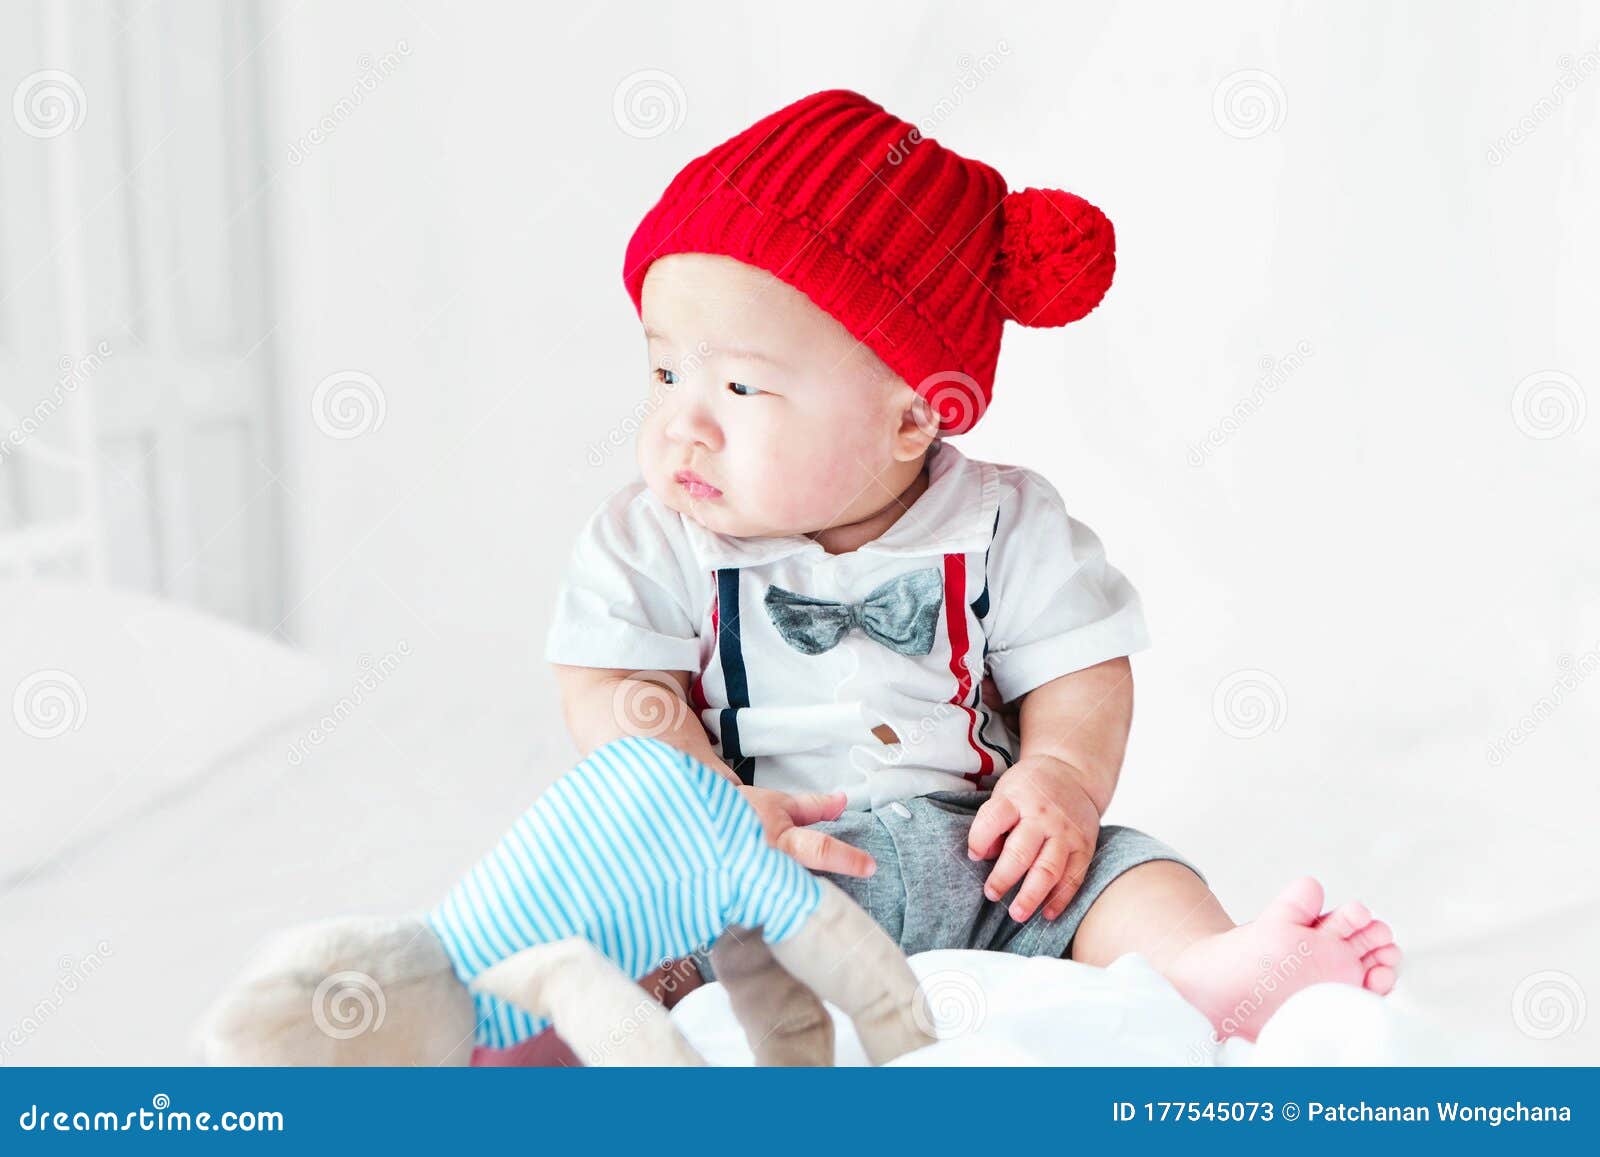 portrait of a newborn asian baby, a child wore a suit and a red wool hat sit ting on bedroom, cute and smilingly